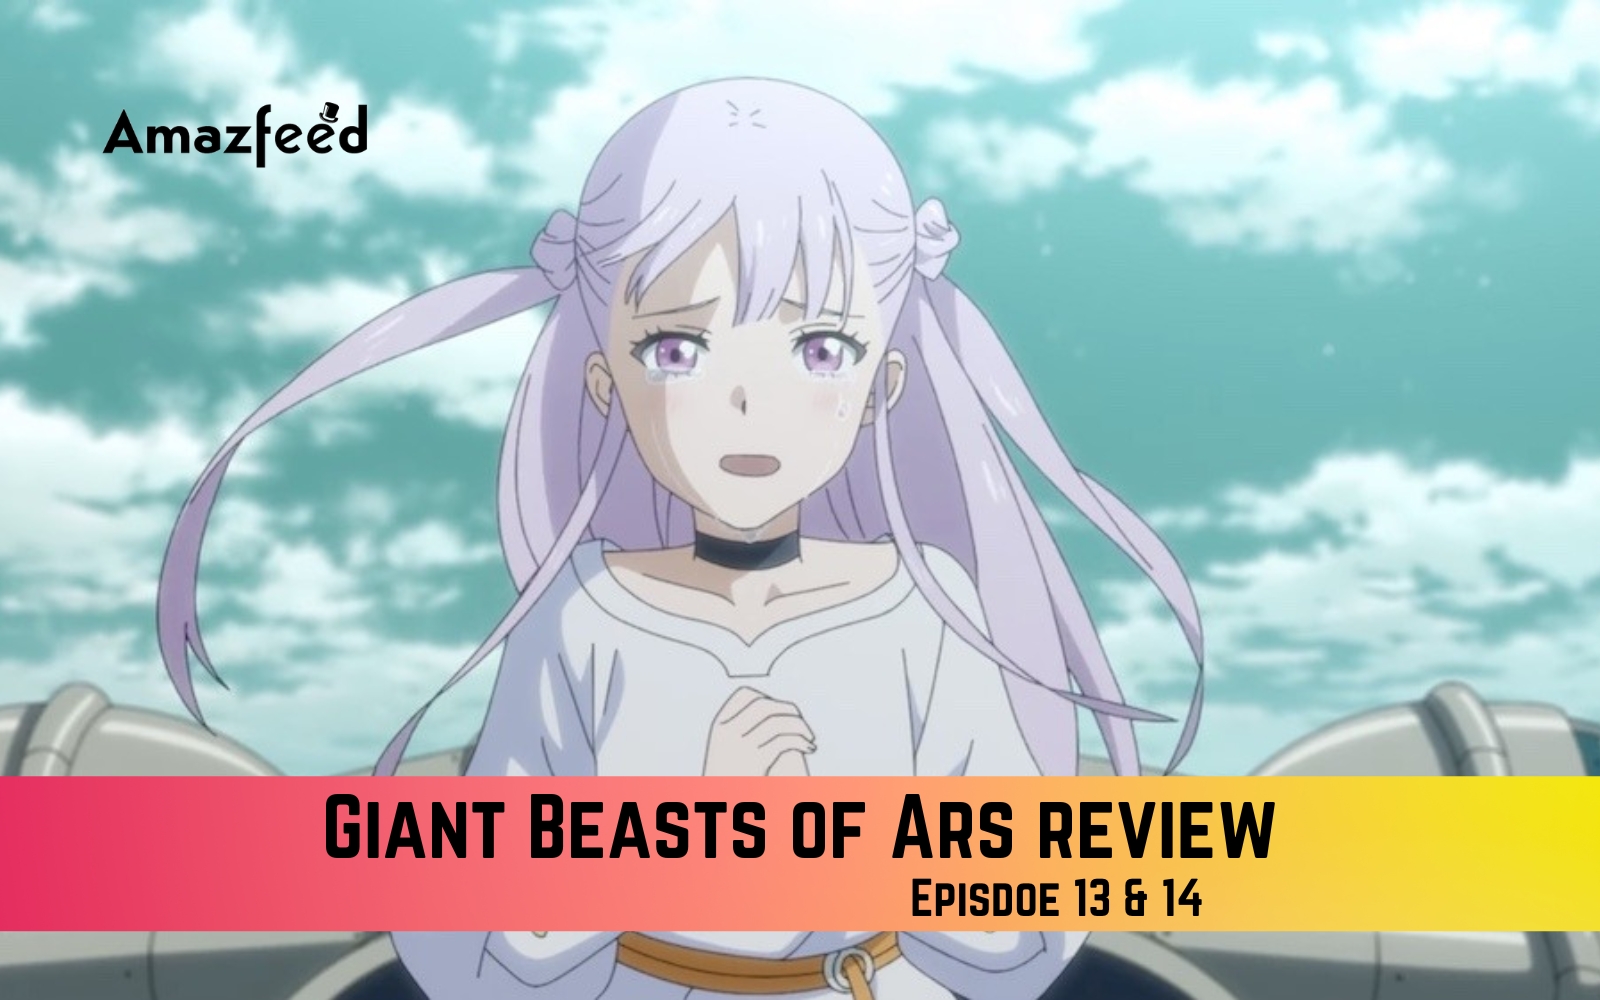 Giant Beasts of Ars Anime Reveals More Cast, Key Visual - News